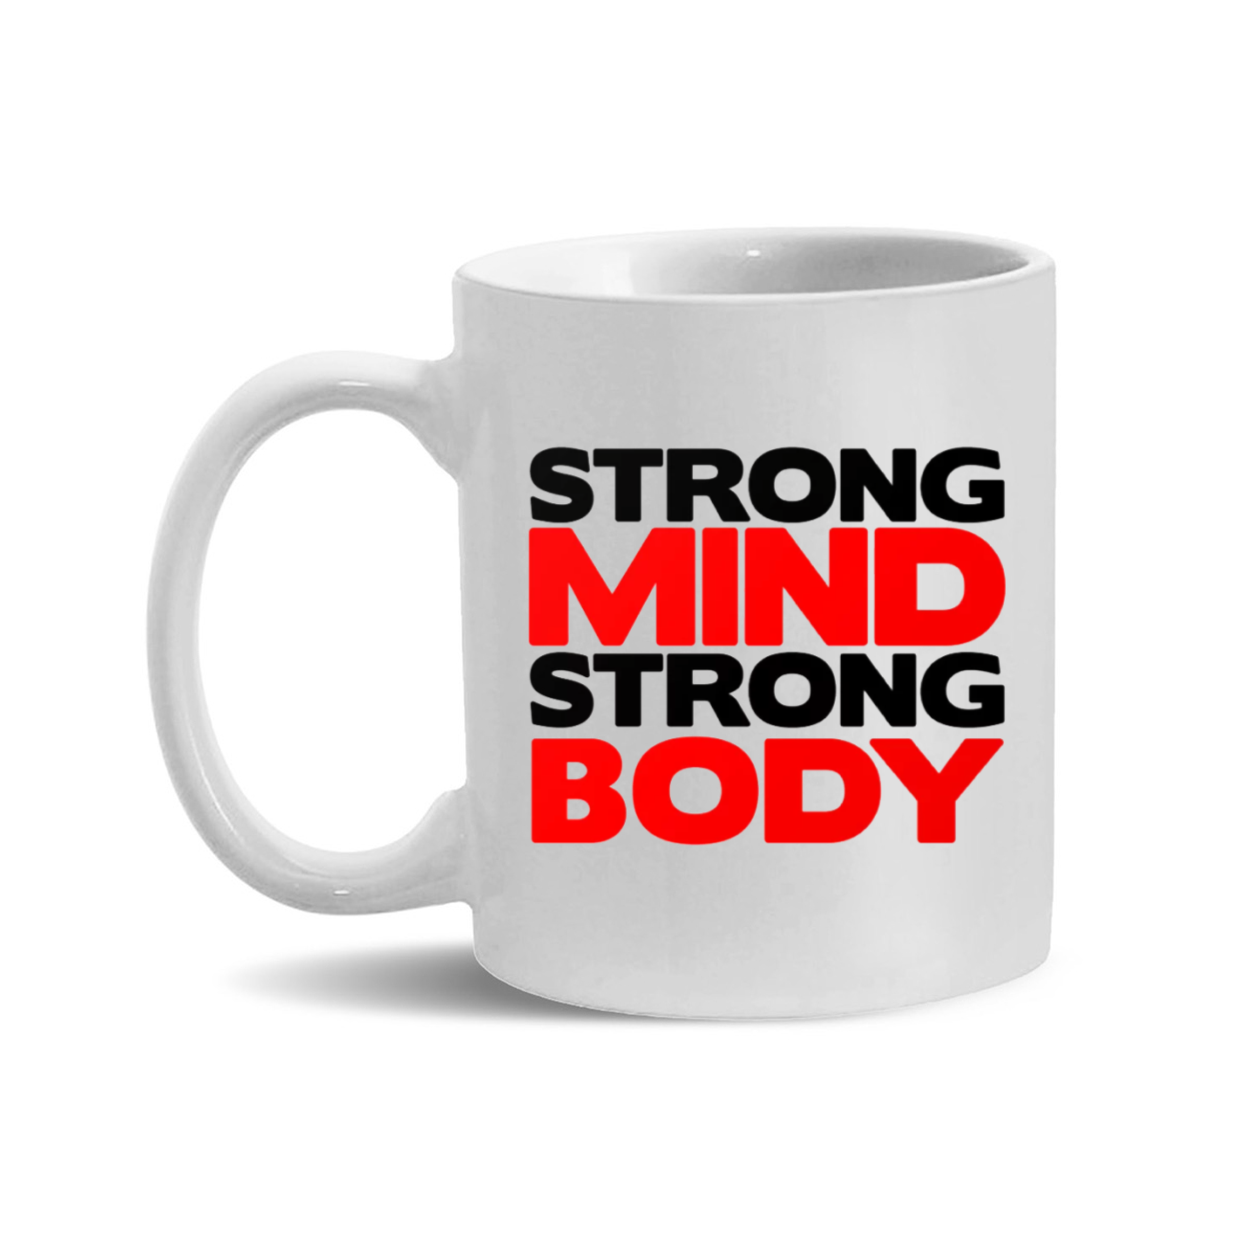 YOLO FITTED'S STRONG MIND STRONG BODY MUG - Yolofitted